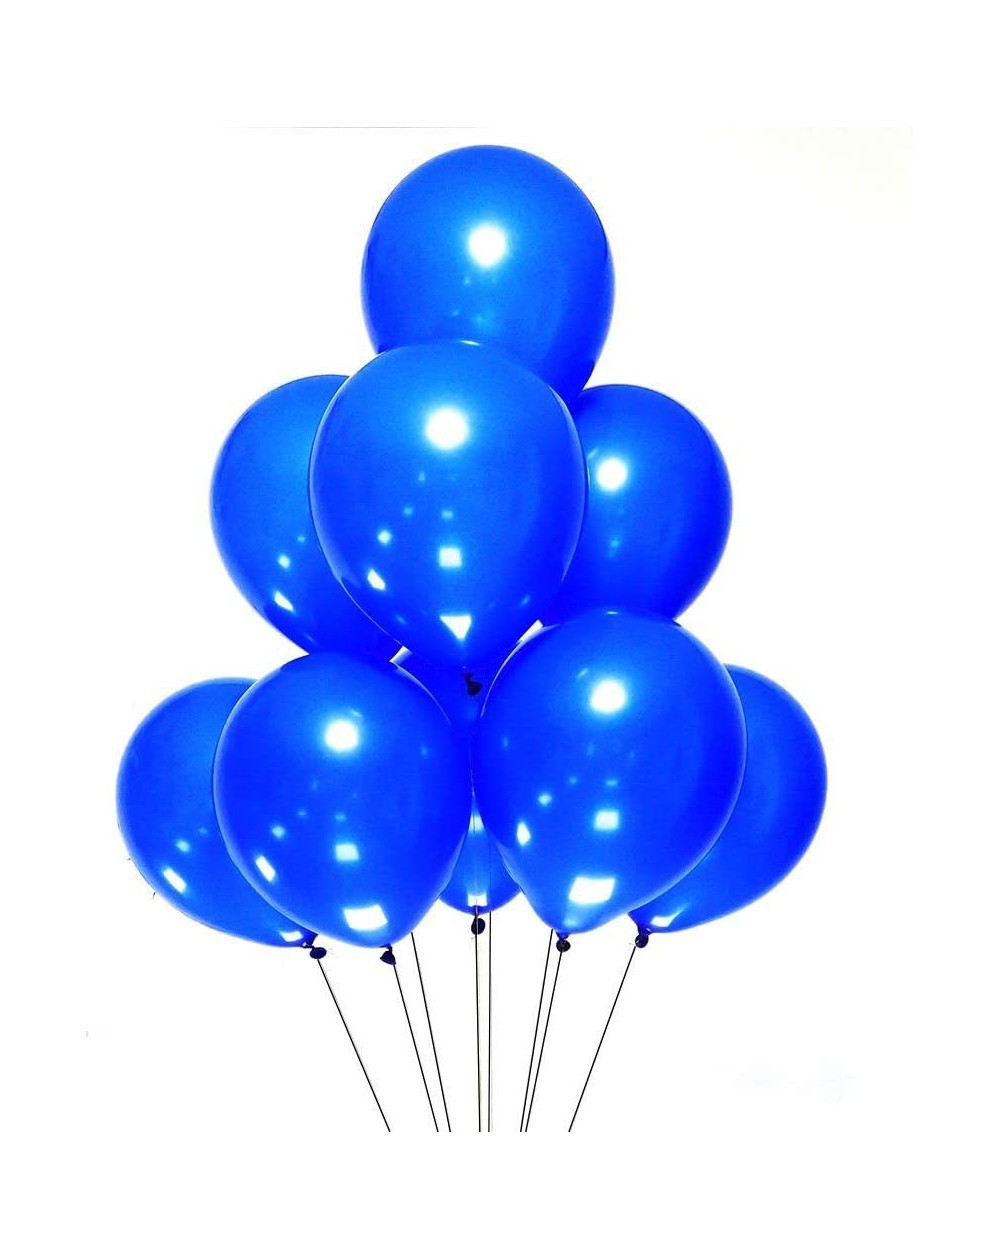 Balloons 100 Pack Royal Blue Balloons 12 Inch(Thicken 3.2g/pcs) Pearl Round Helium Pearlized Balloons for Wedding Birthday Ch...